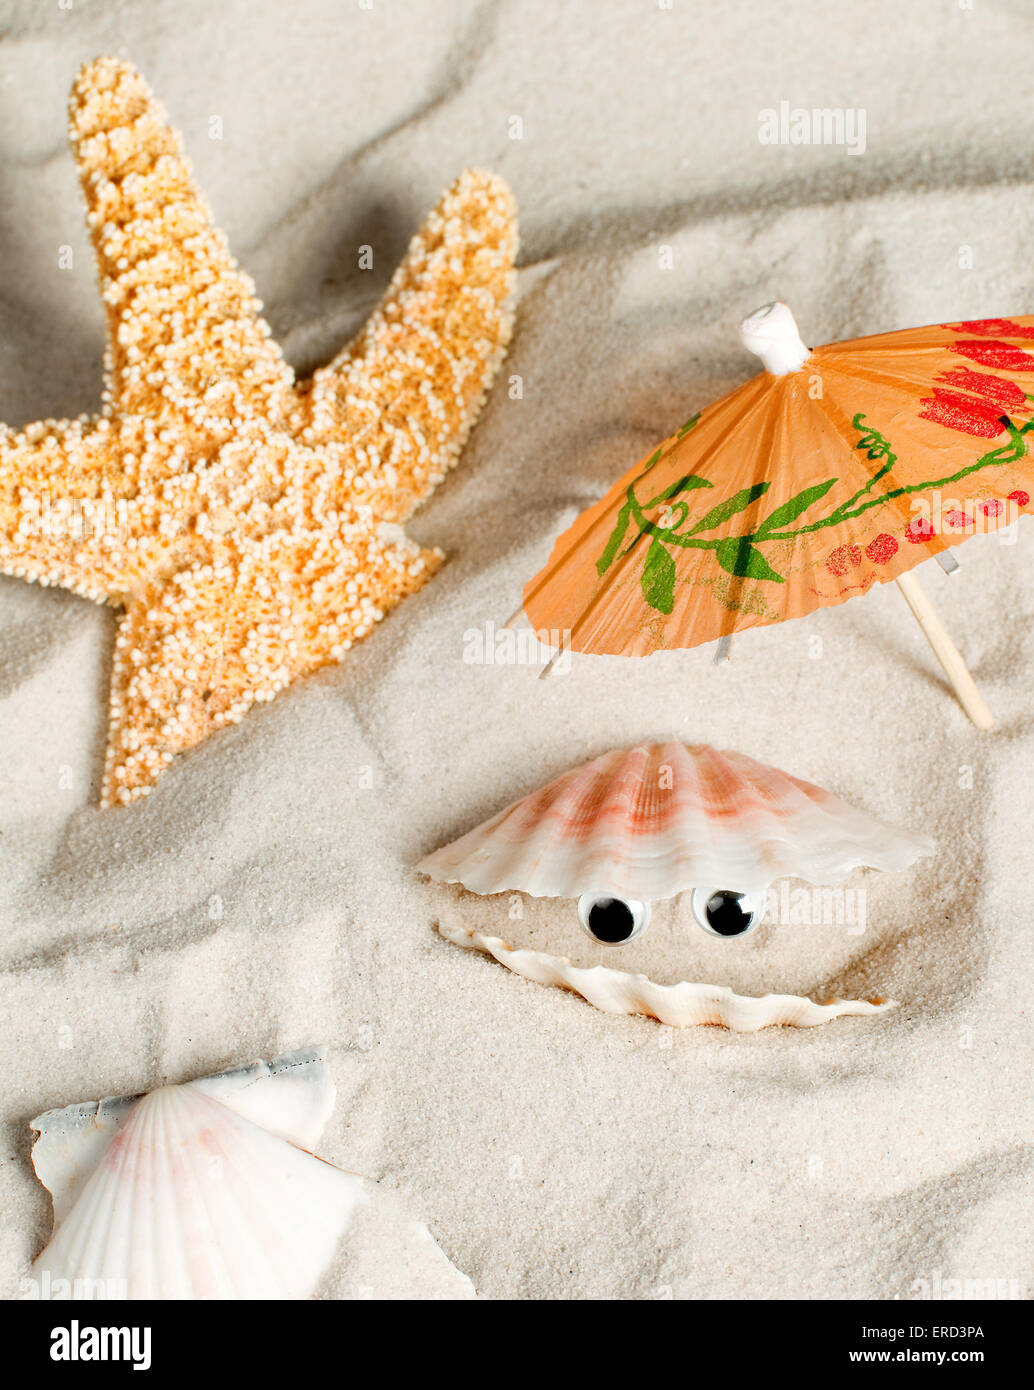 Open seashell on a beach with funny looking eyes Stock Photo